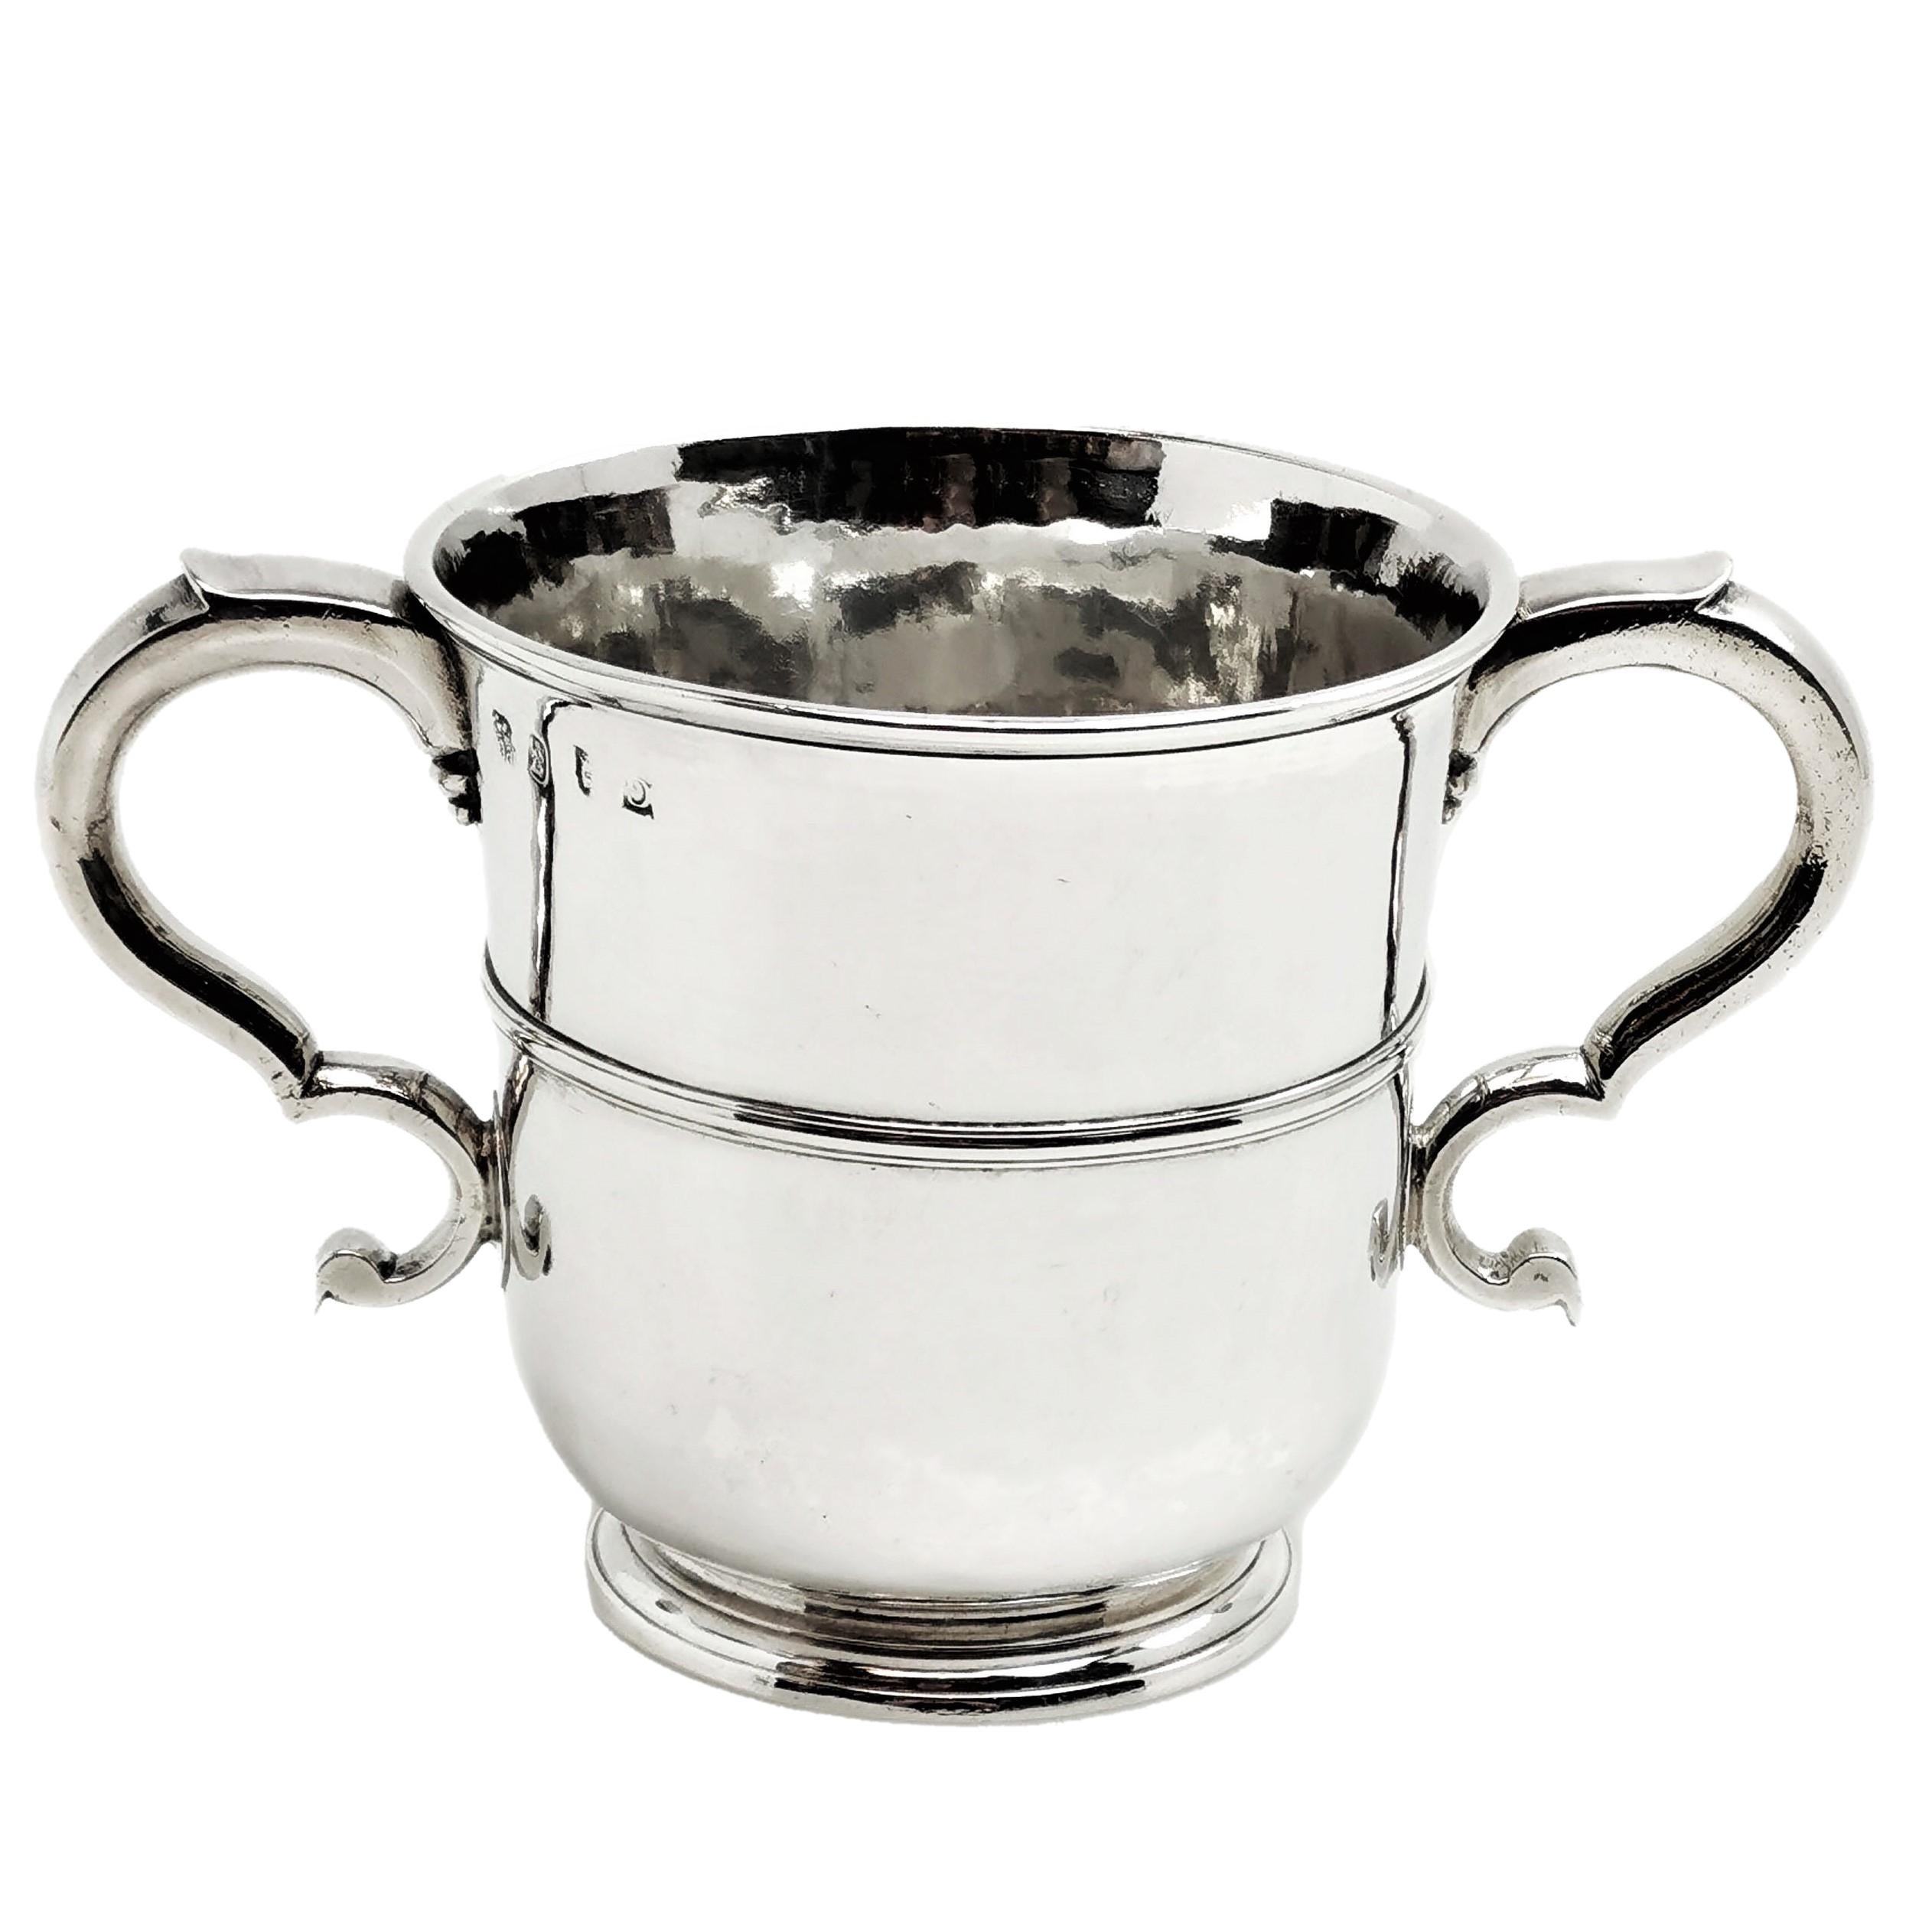 A lovely Antique George I solid Silver Cup with two elegant scroll handle. The elegant two-handled Cup stands on a low spread foot and has a band around the centre. It is unembellished except for the AA engraved initials.
 
 Made in London in 1722